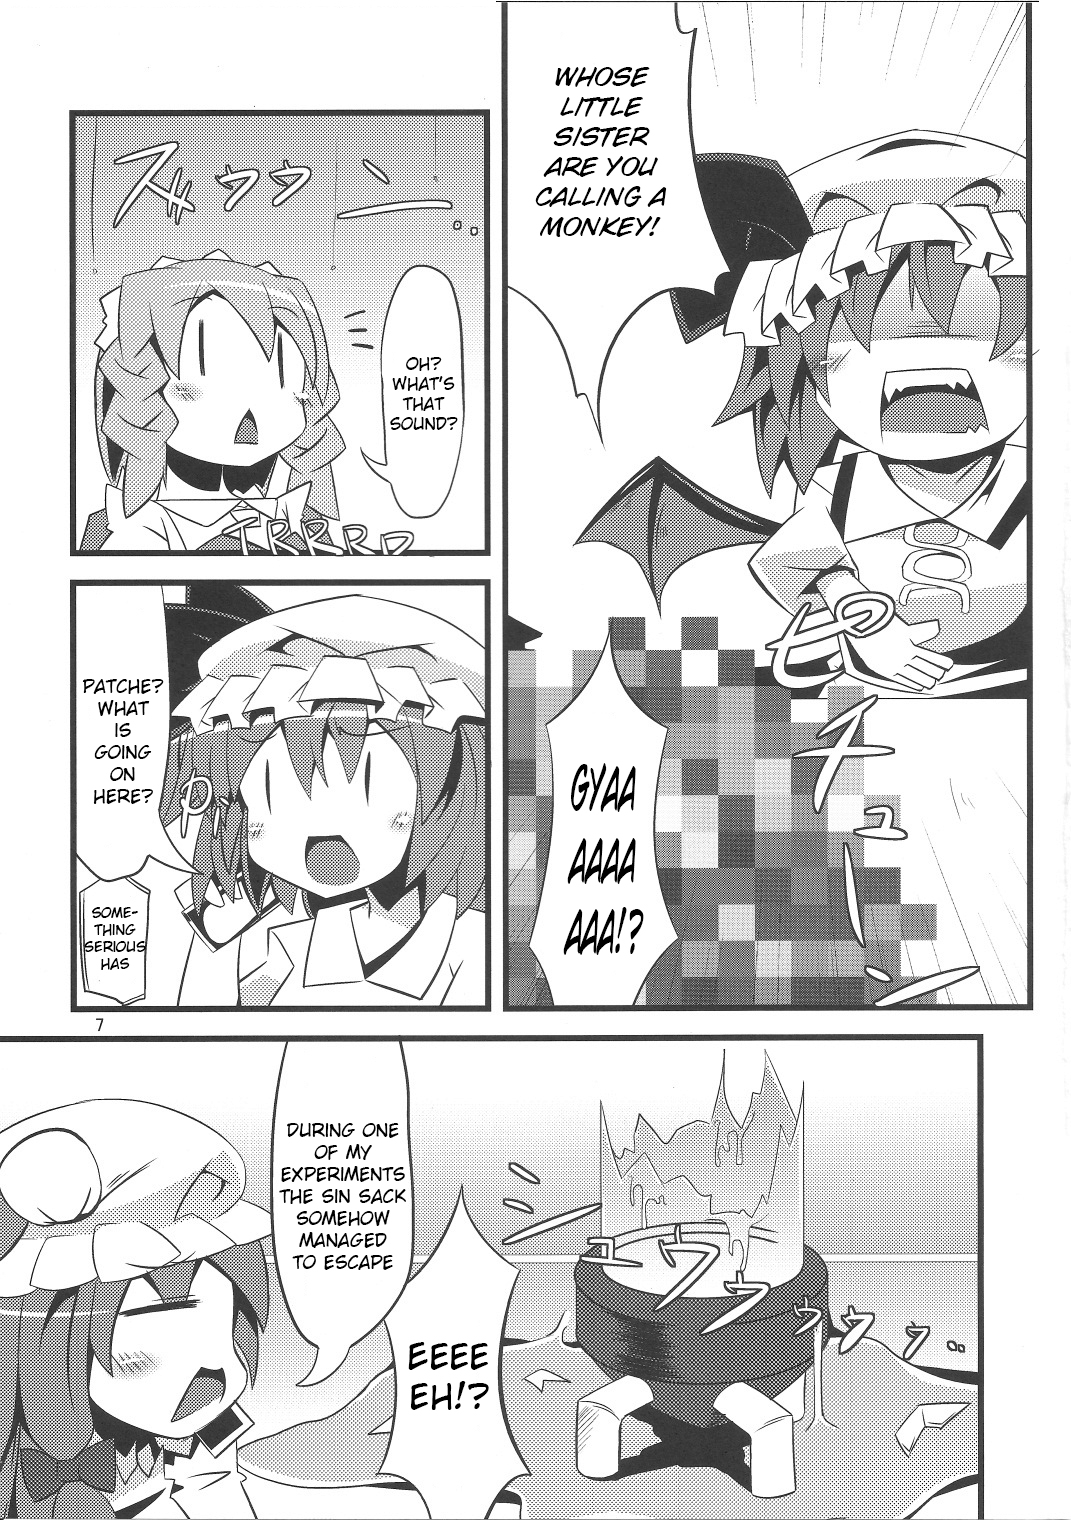 (Kouroumu 7) [Angelic Feather (Land Sale)] Tentacle Play (Touhou Project) [English] page 6 full